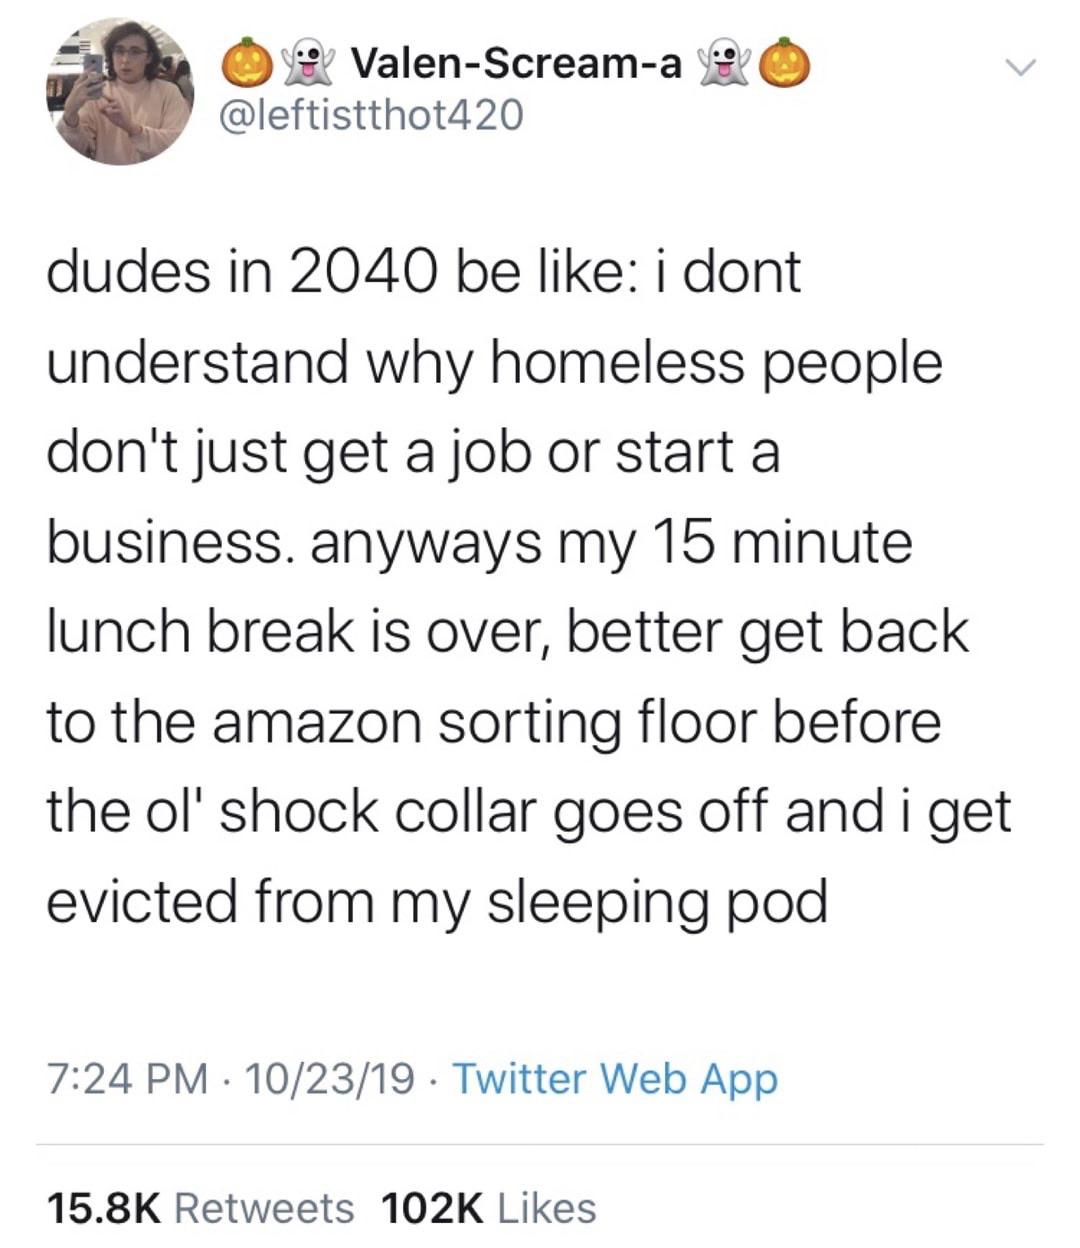 document - 0 O ValenScreama v dudes in 2040 be i dont understand why homeless people don't just get a job or start a business. anyways my 15 minute lunch break is over, better get back to the amazon sorting floor before the ol' shock collar goes off and i